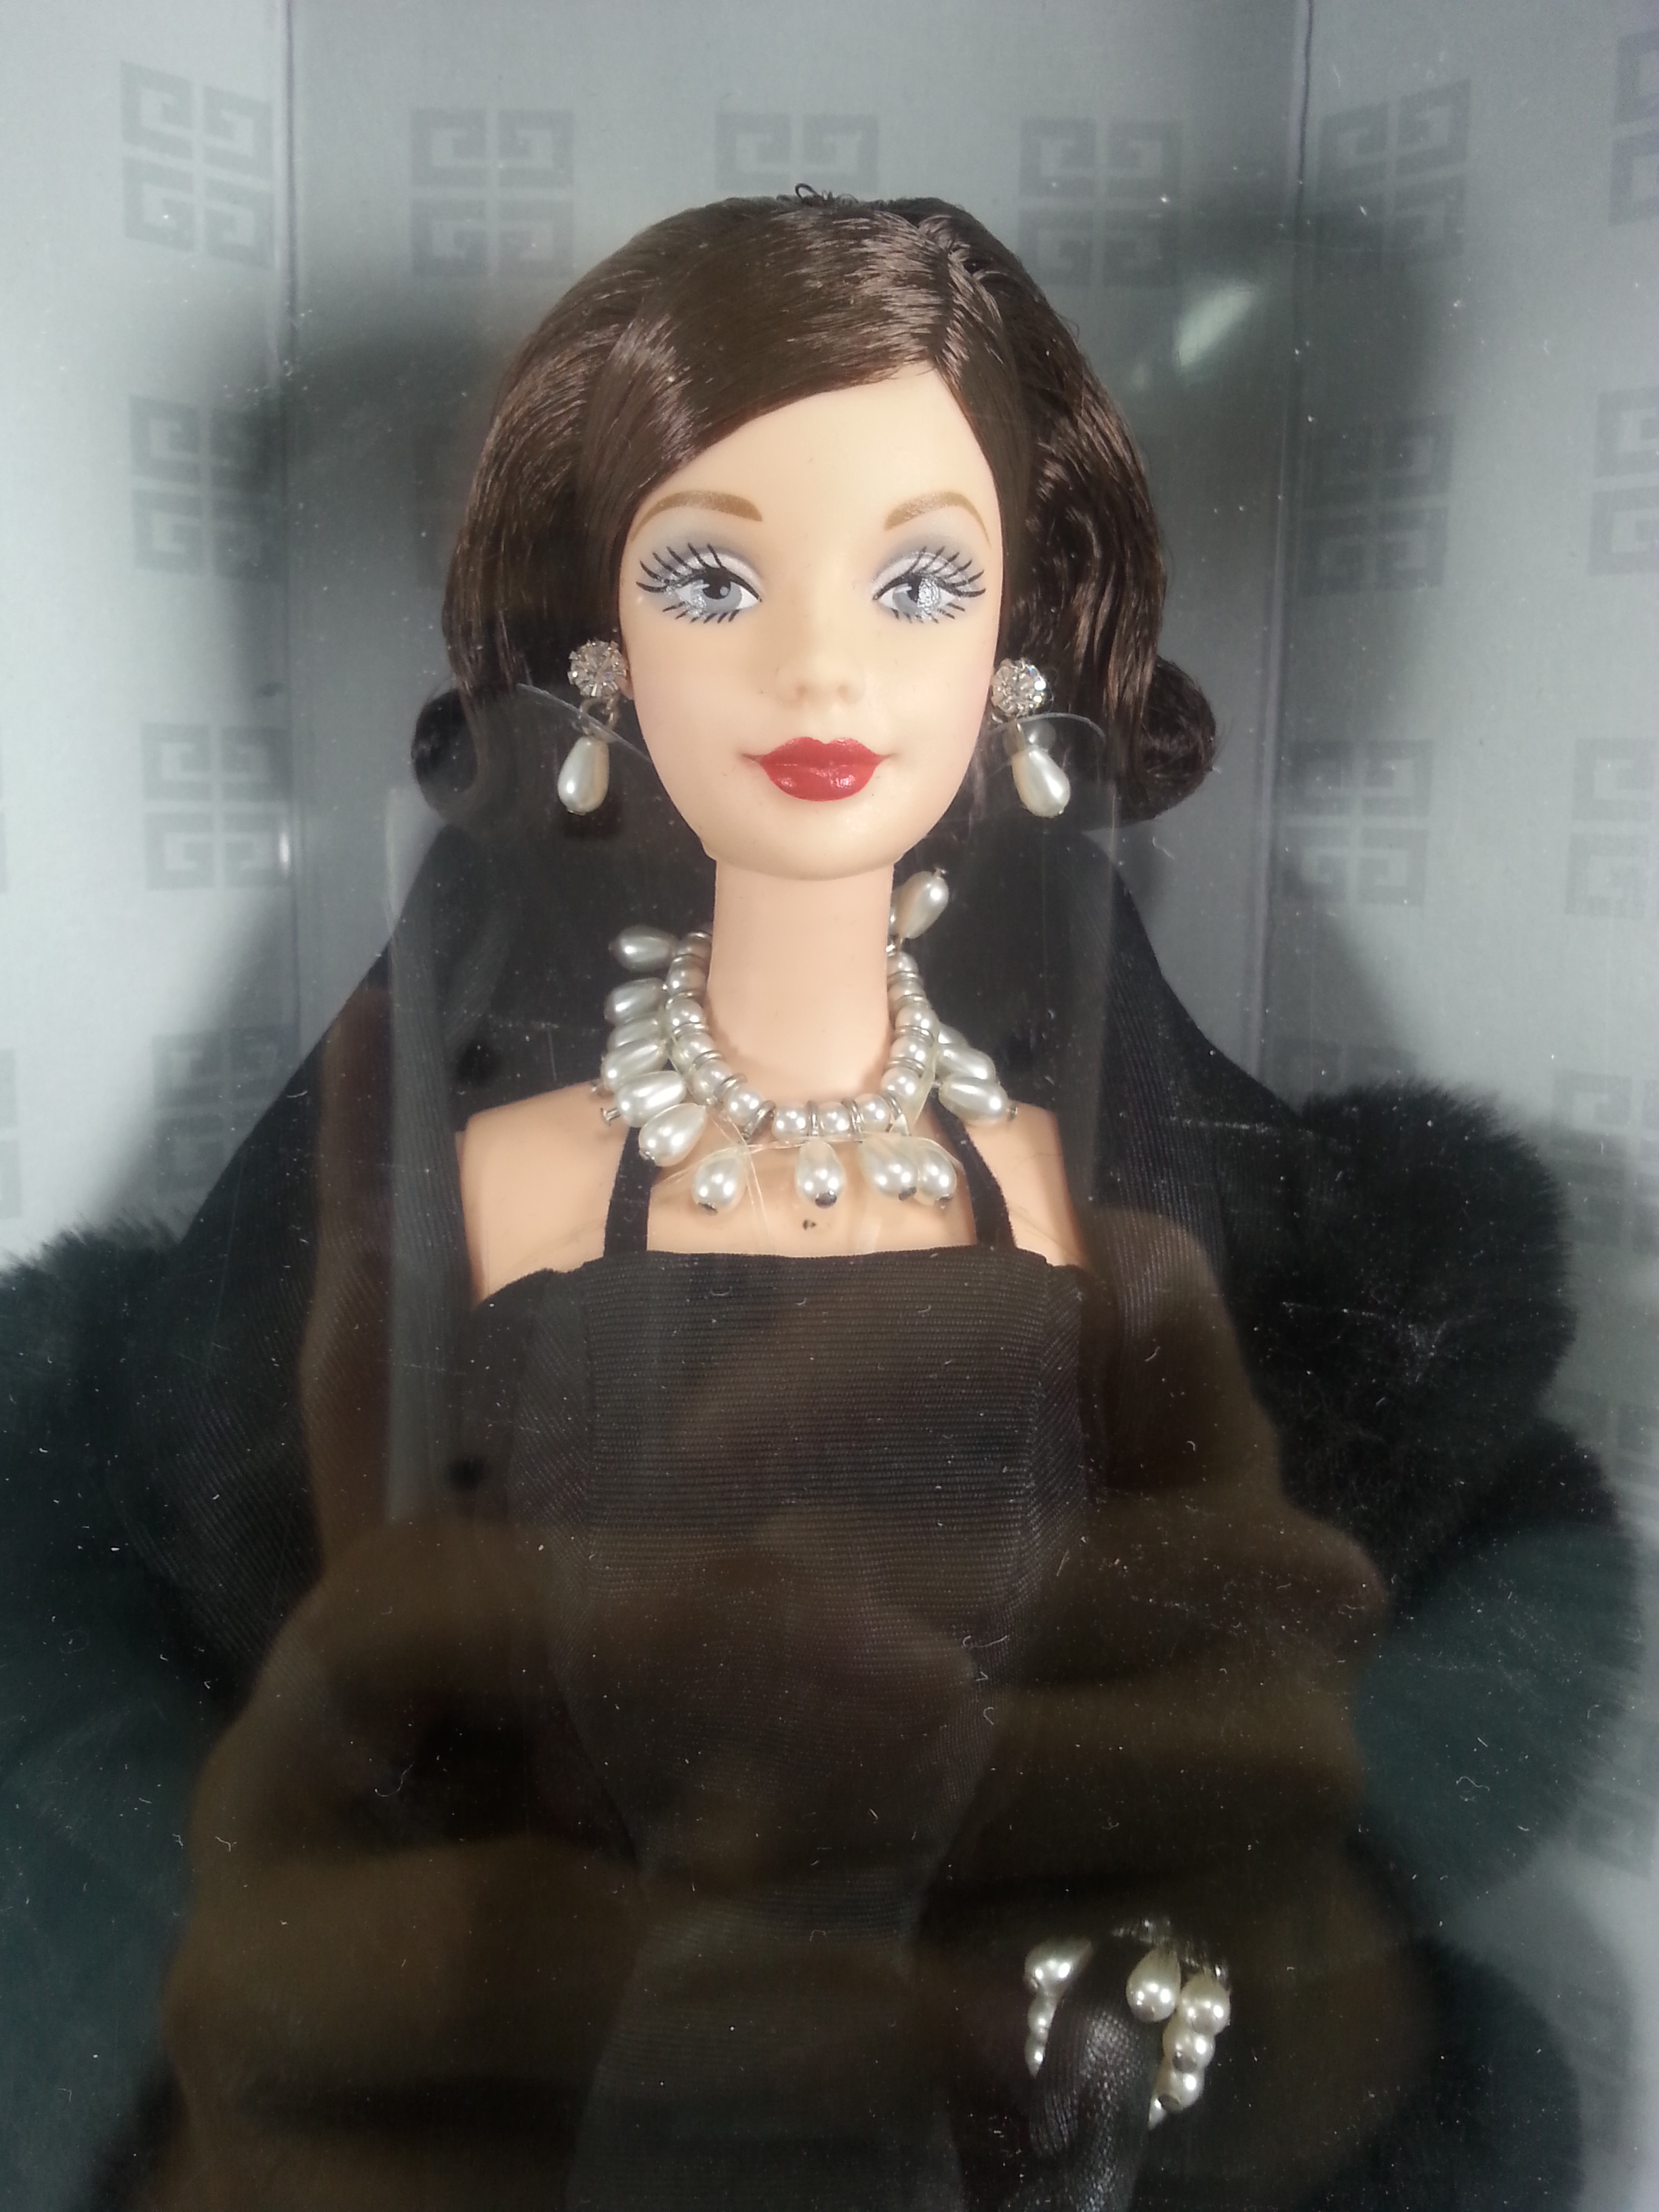 Value of GIVENCHY 11-1/2 inch Limited Edition Barbie Doll (Mattel